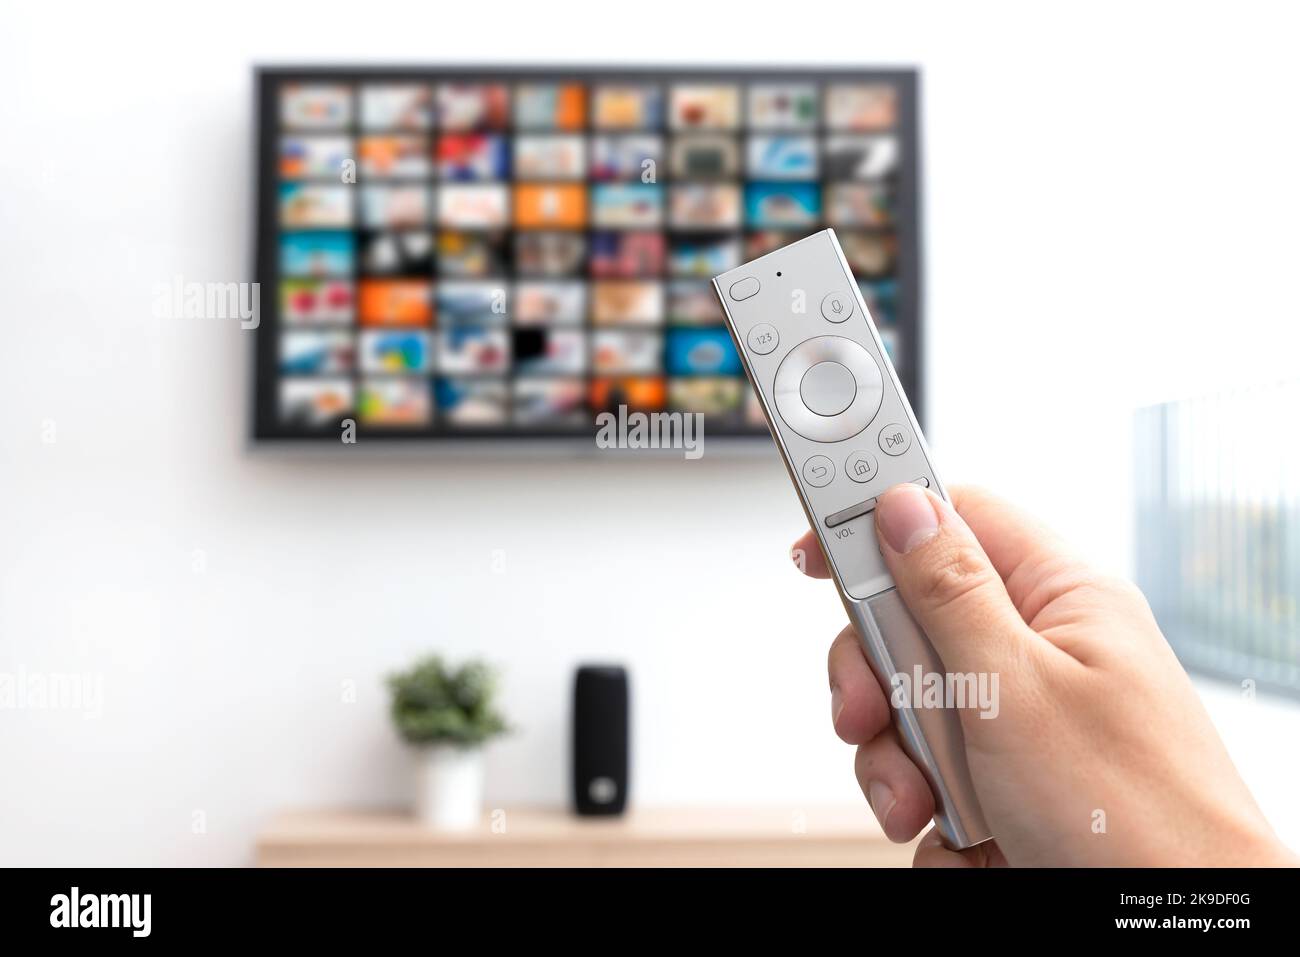 Multimedia video streaming concept. Television set, remote control in hand Stock Photo